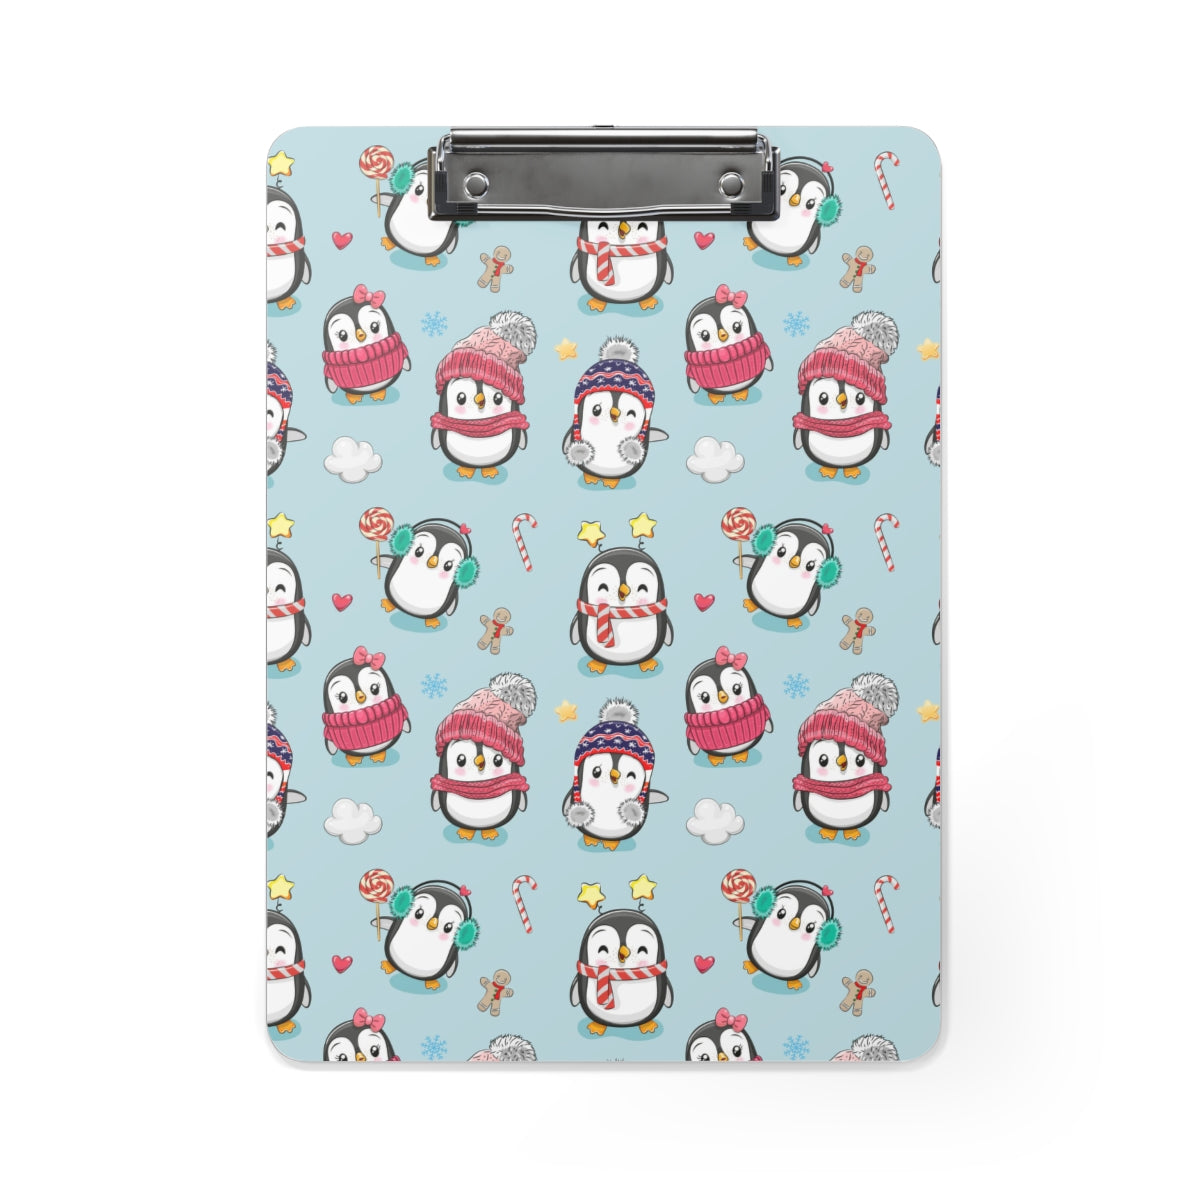 Penguins in Winter Clothes Clipboard